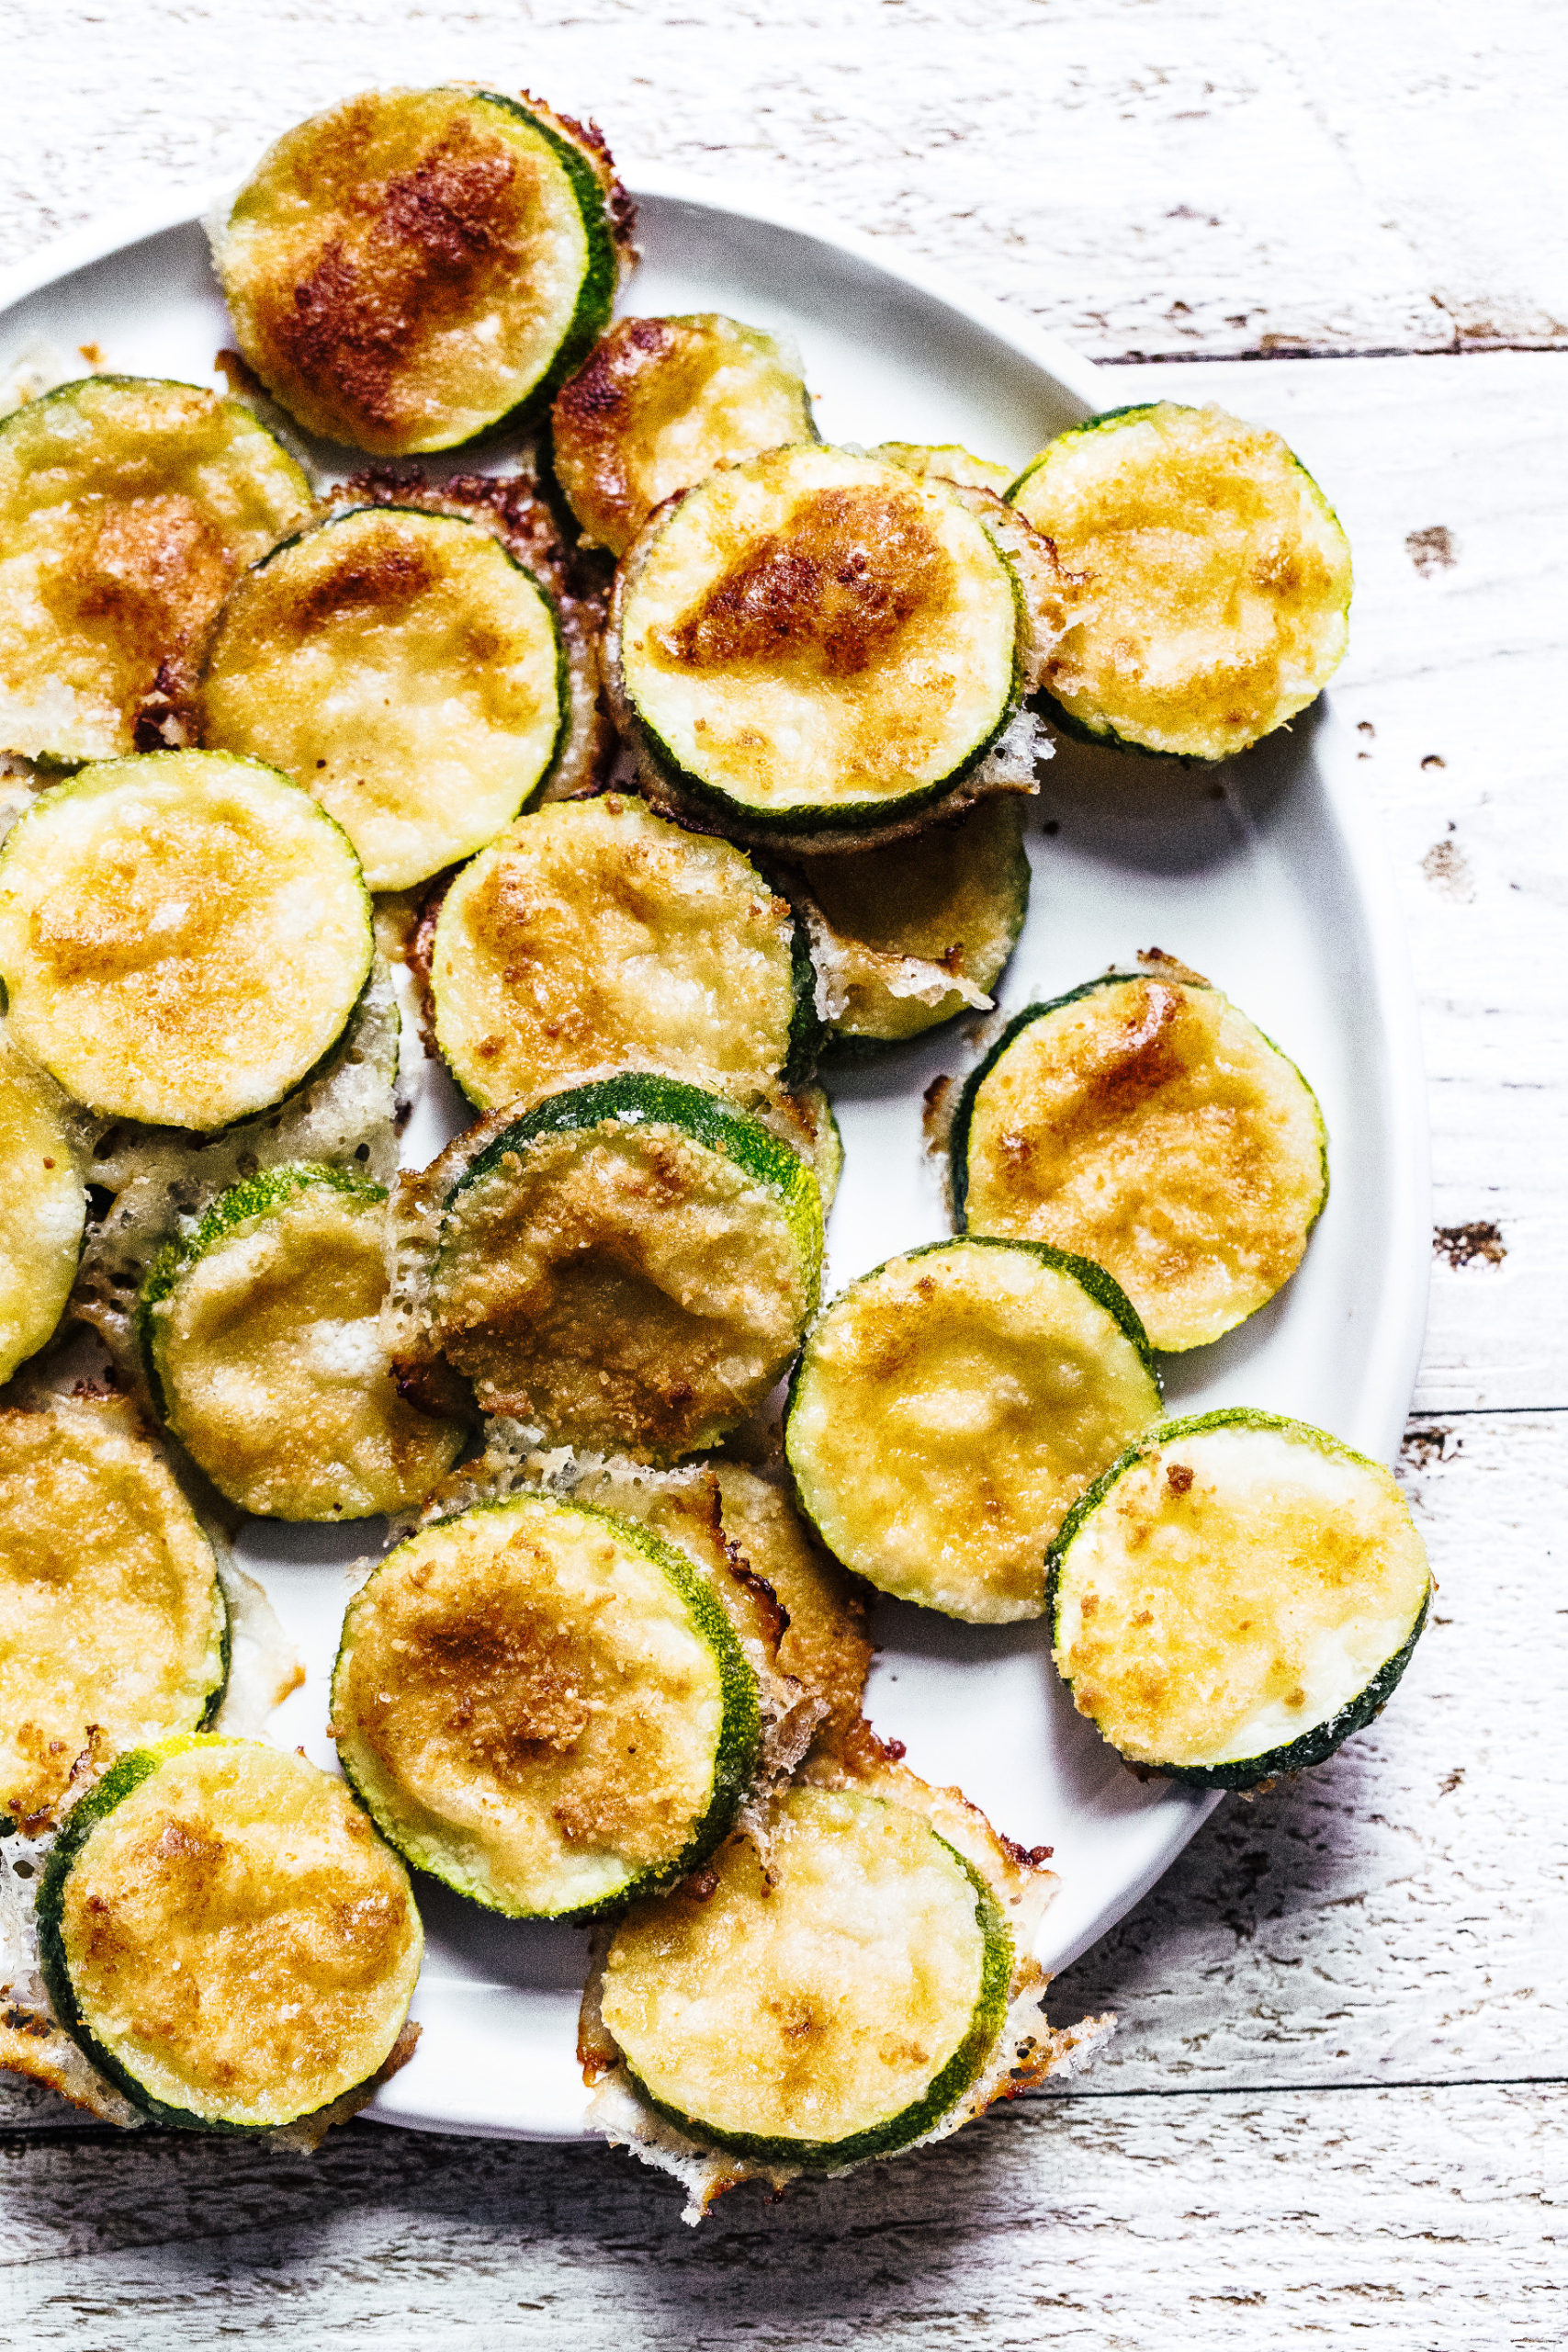 Parmesan Baked Zucchini (two ingredients!)